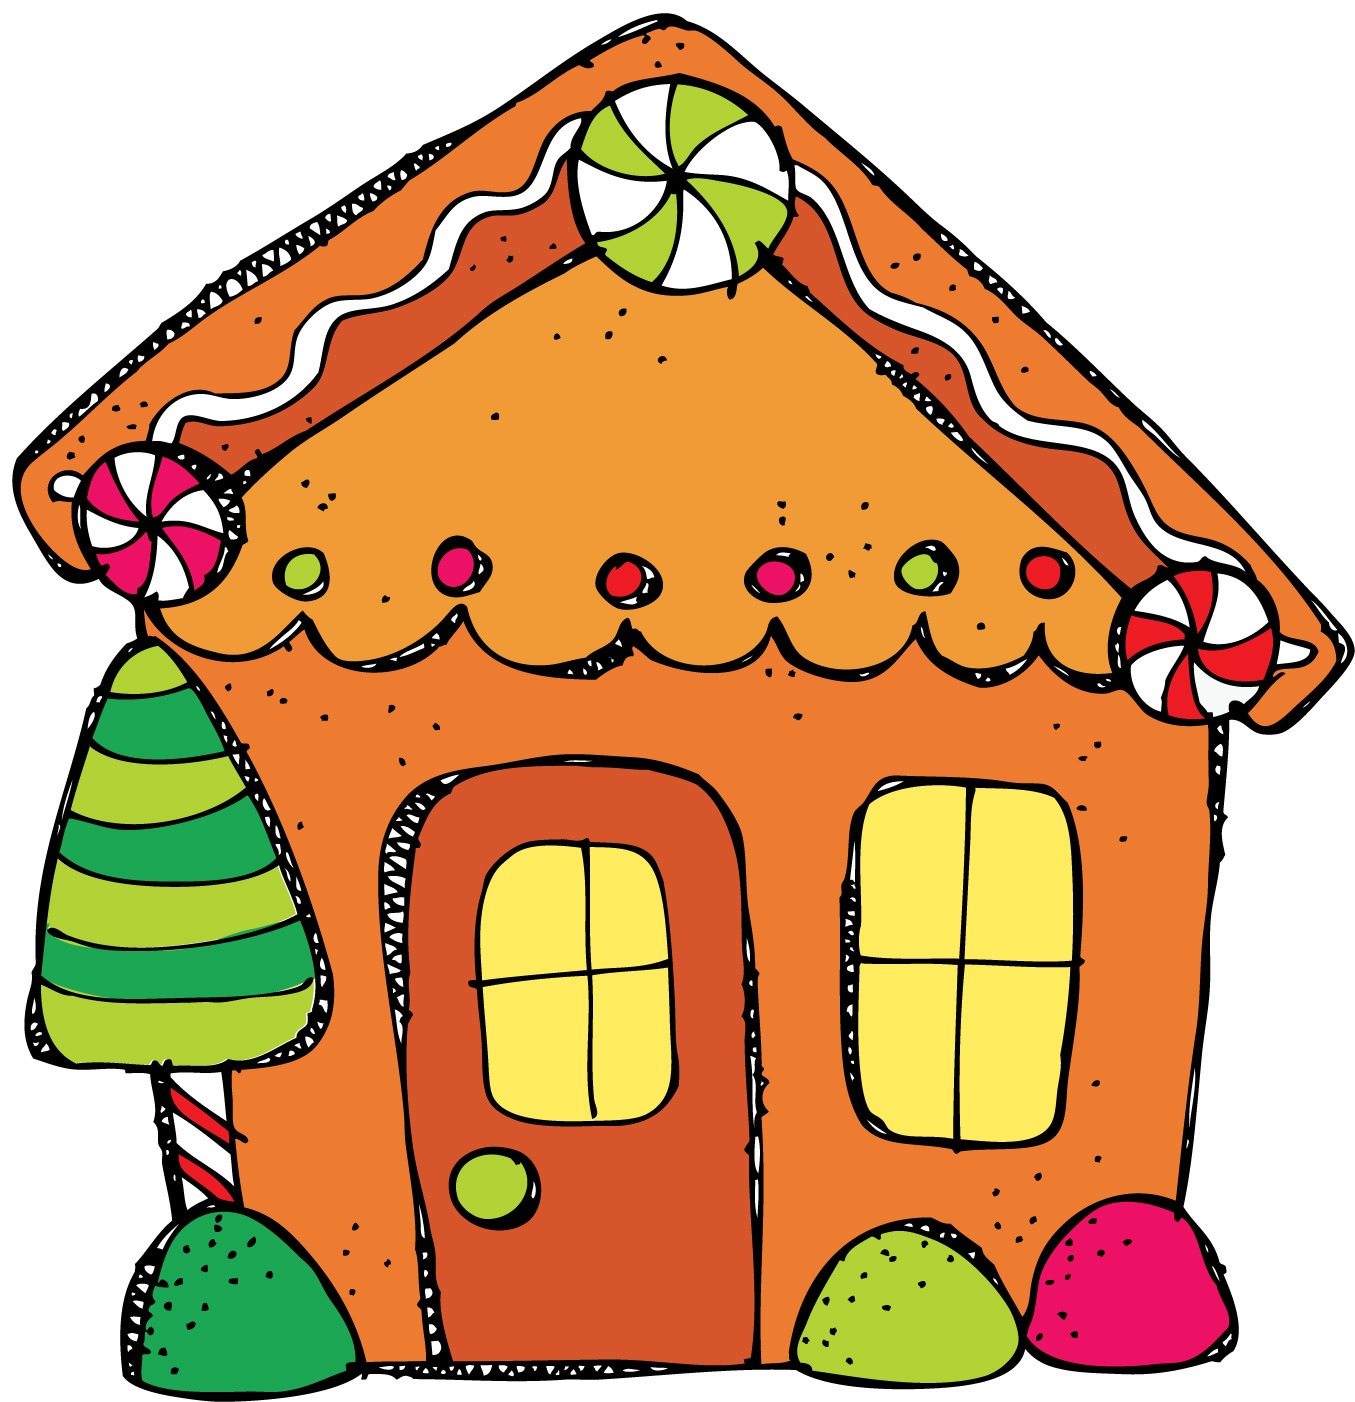 Gingerbread House Clip Art Images & Pictures - Becuo